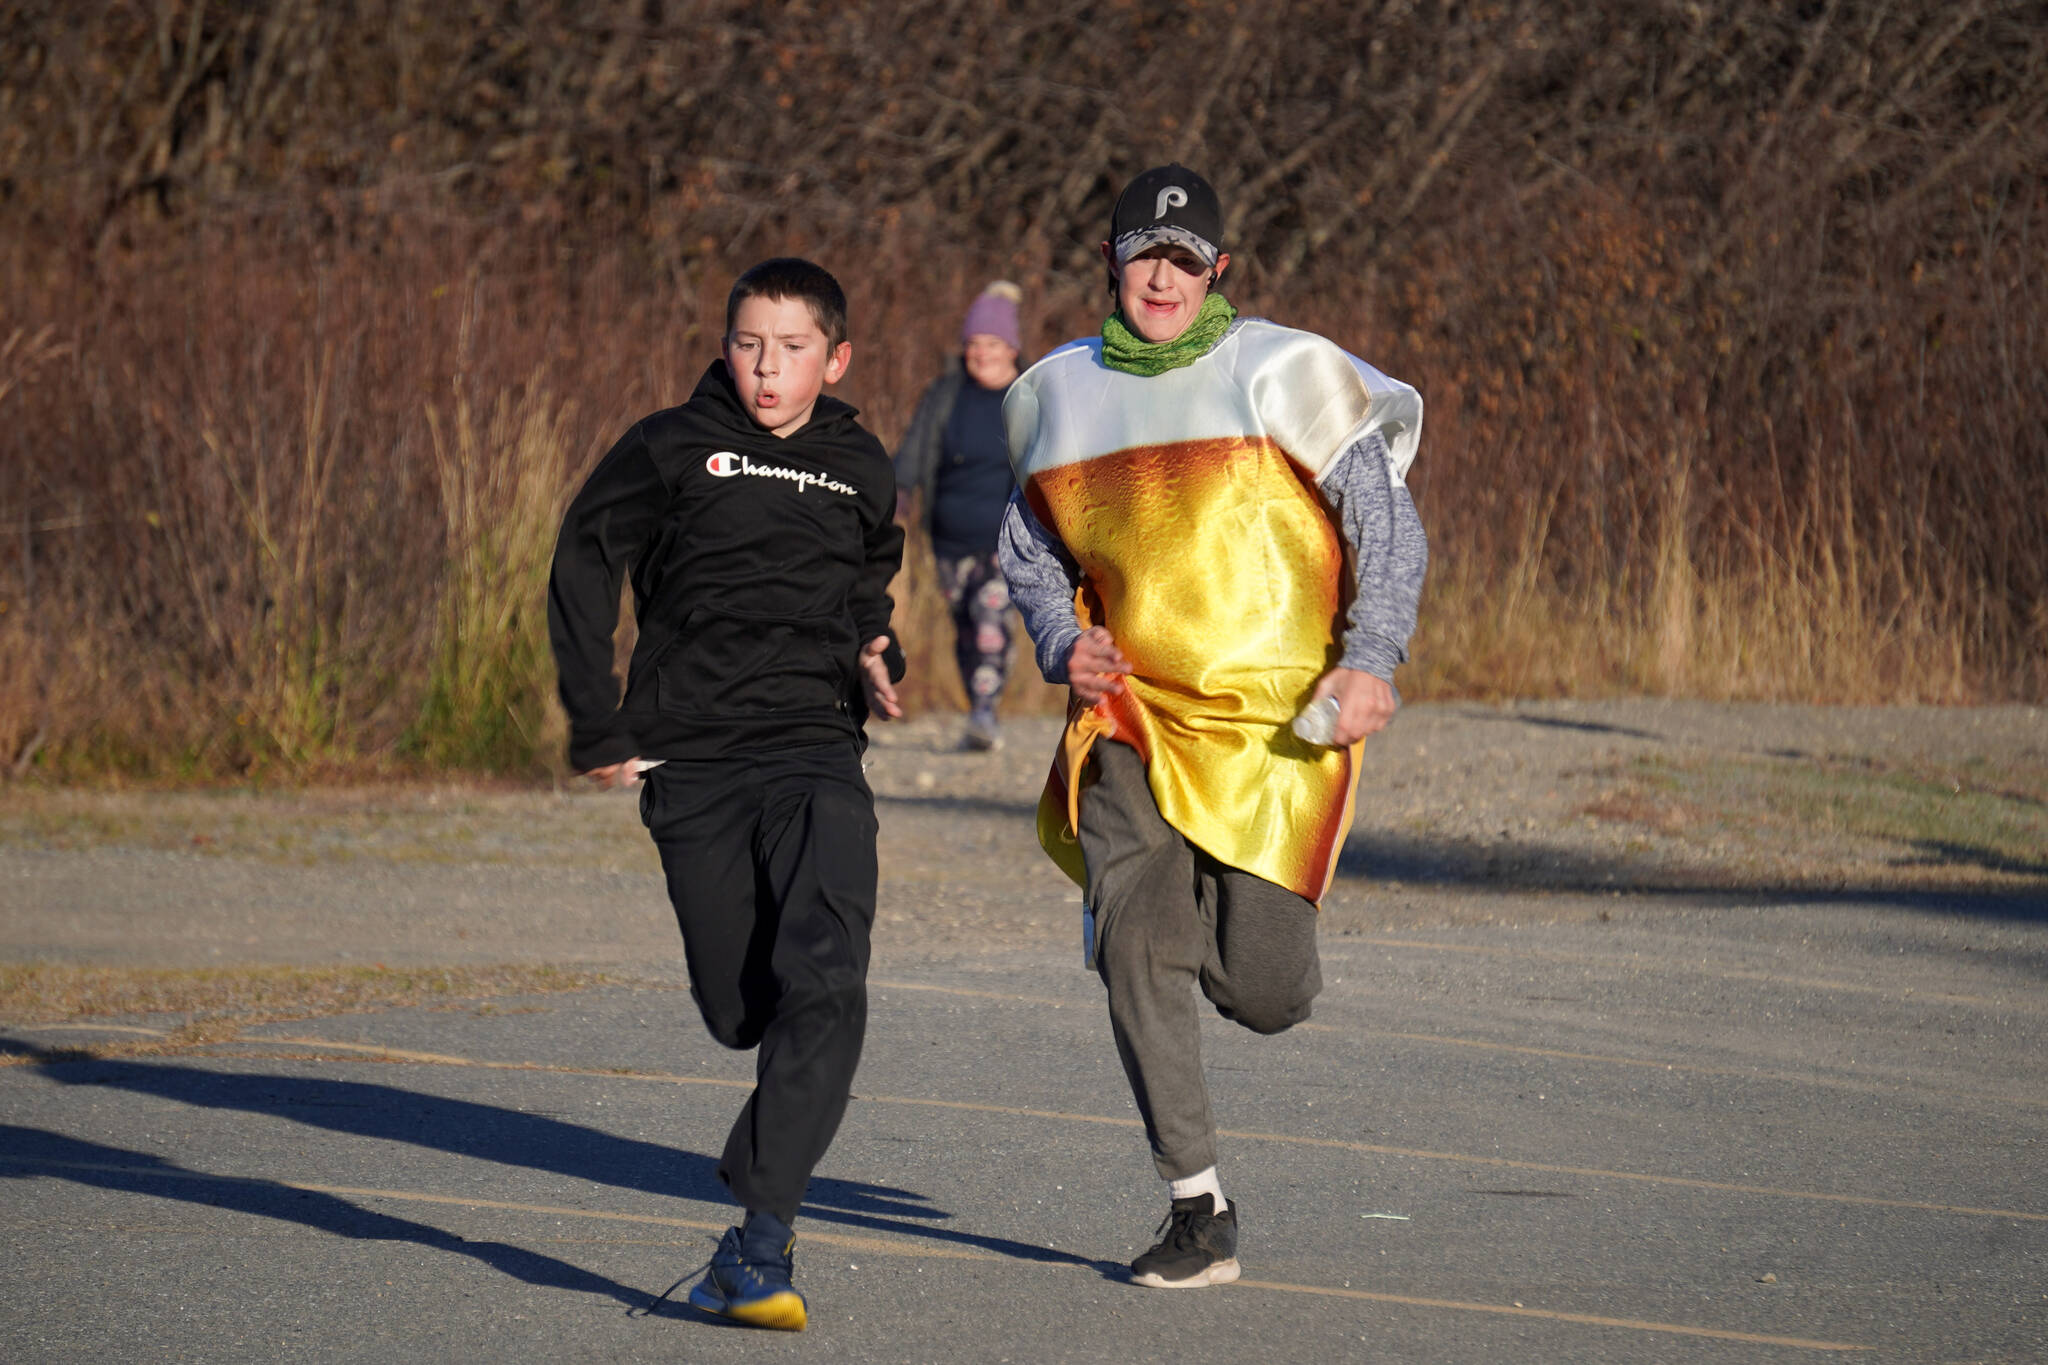 Wyatt Kingery and Dominic Smith race side by side to the finish chute of the Costume Caper at Nikiski Community Recreation Center in Nikiski, Alaska, on Saturday, Oct. 21, 2023. (Jake Dye/Peninsula Clarion)